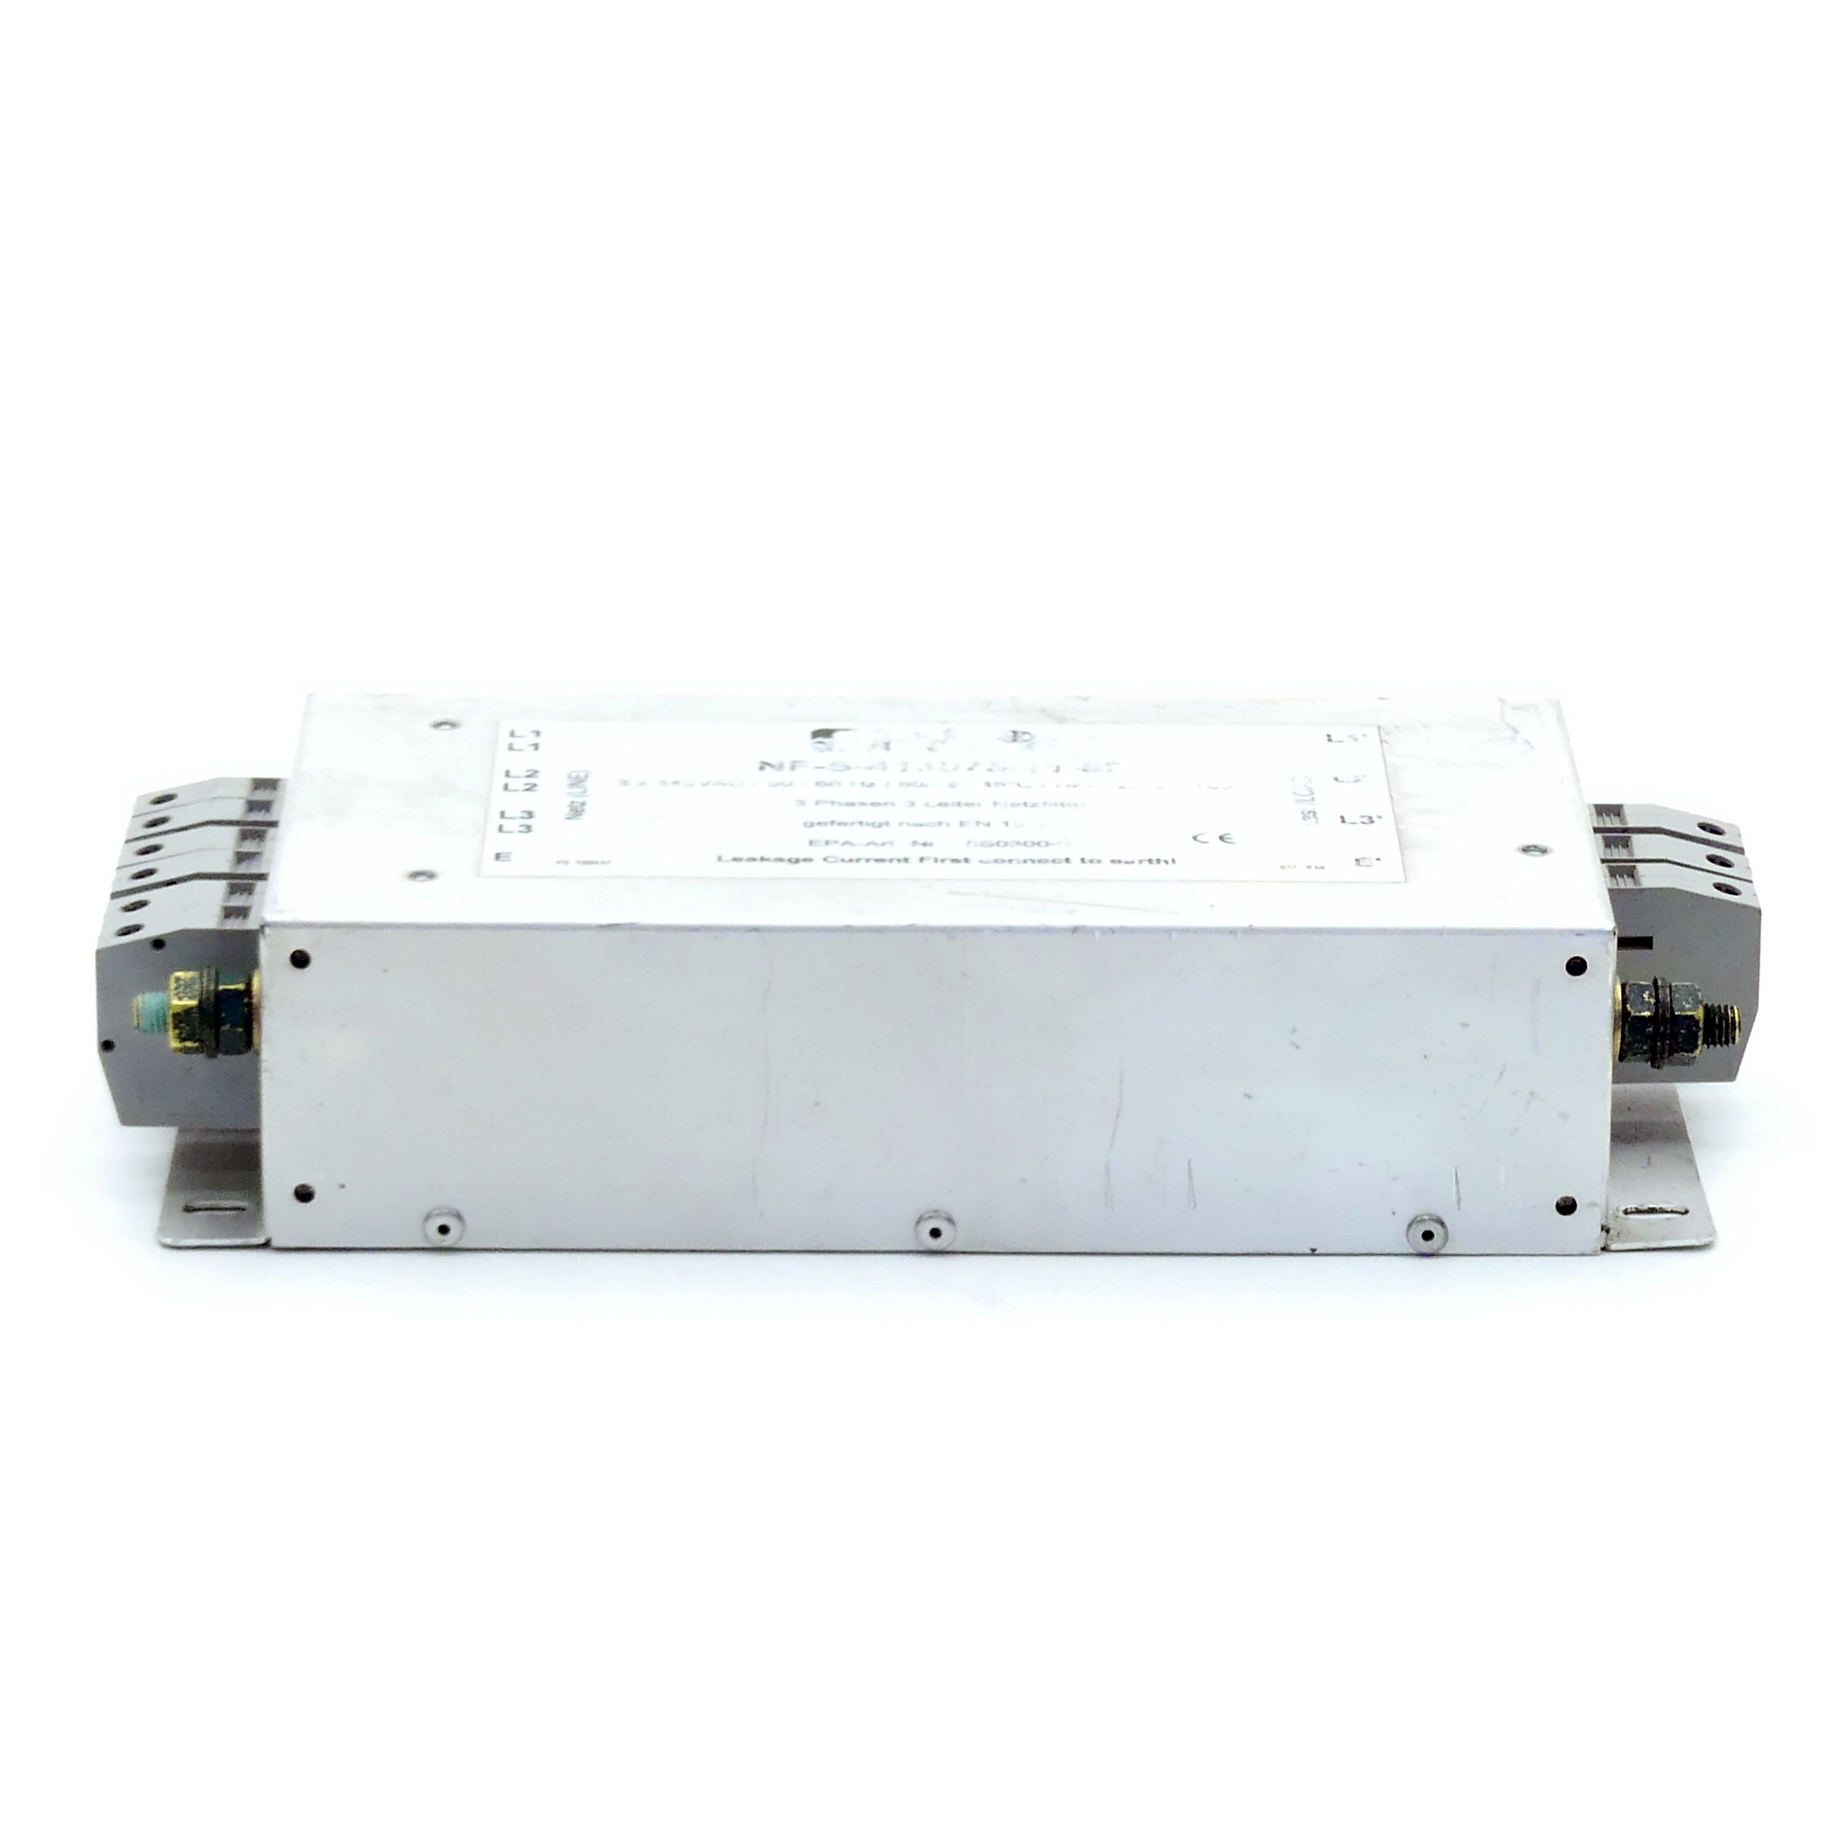 3 phase 3 wire mains filter 